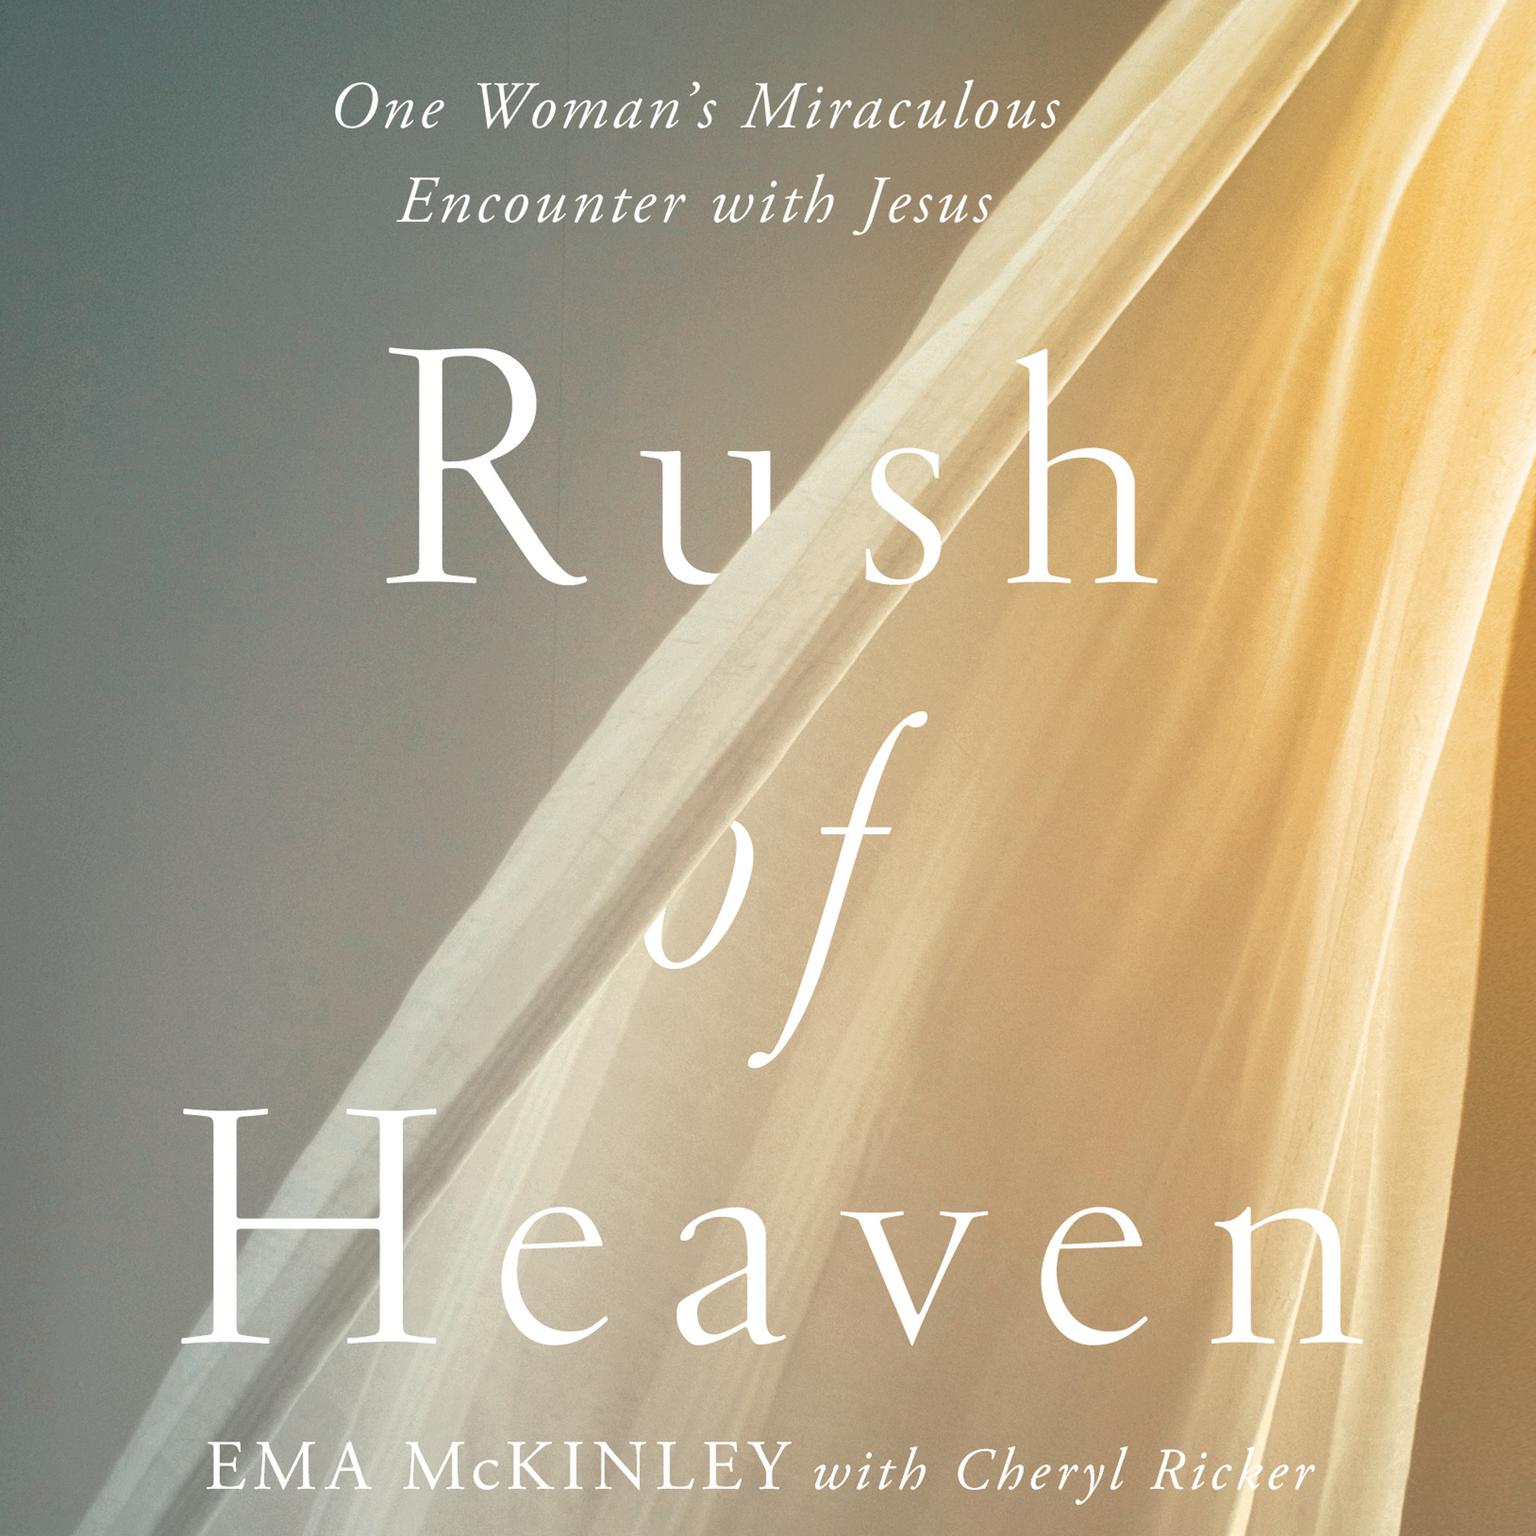 Rush of Heaven: One Woman’s Miraculous Encounter with Jesus Audiobook, by Ema McKinley